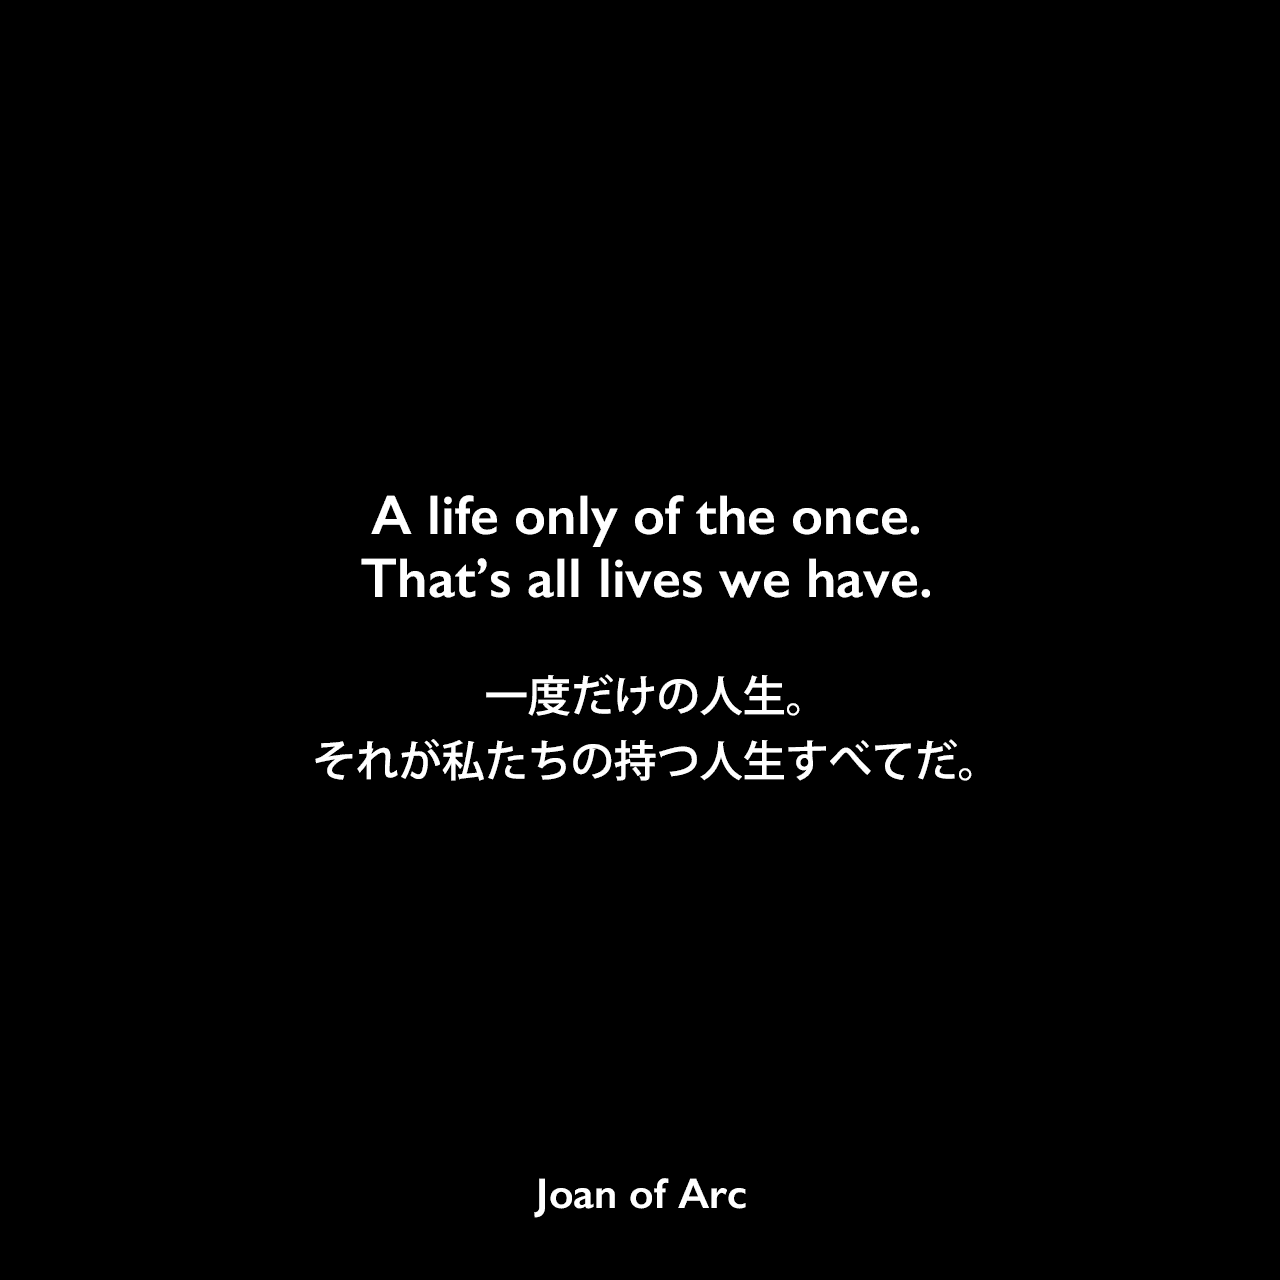 A life only of the once. That’s all lives we have.一度だけの人生。それが私たちの持つ人生すべてだ。